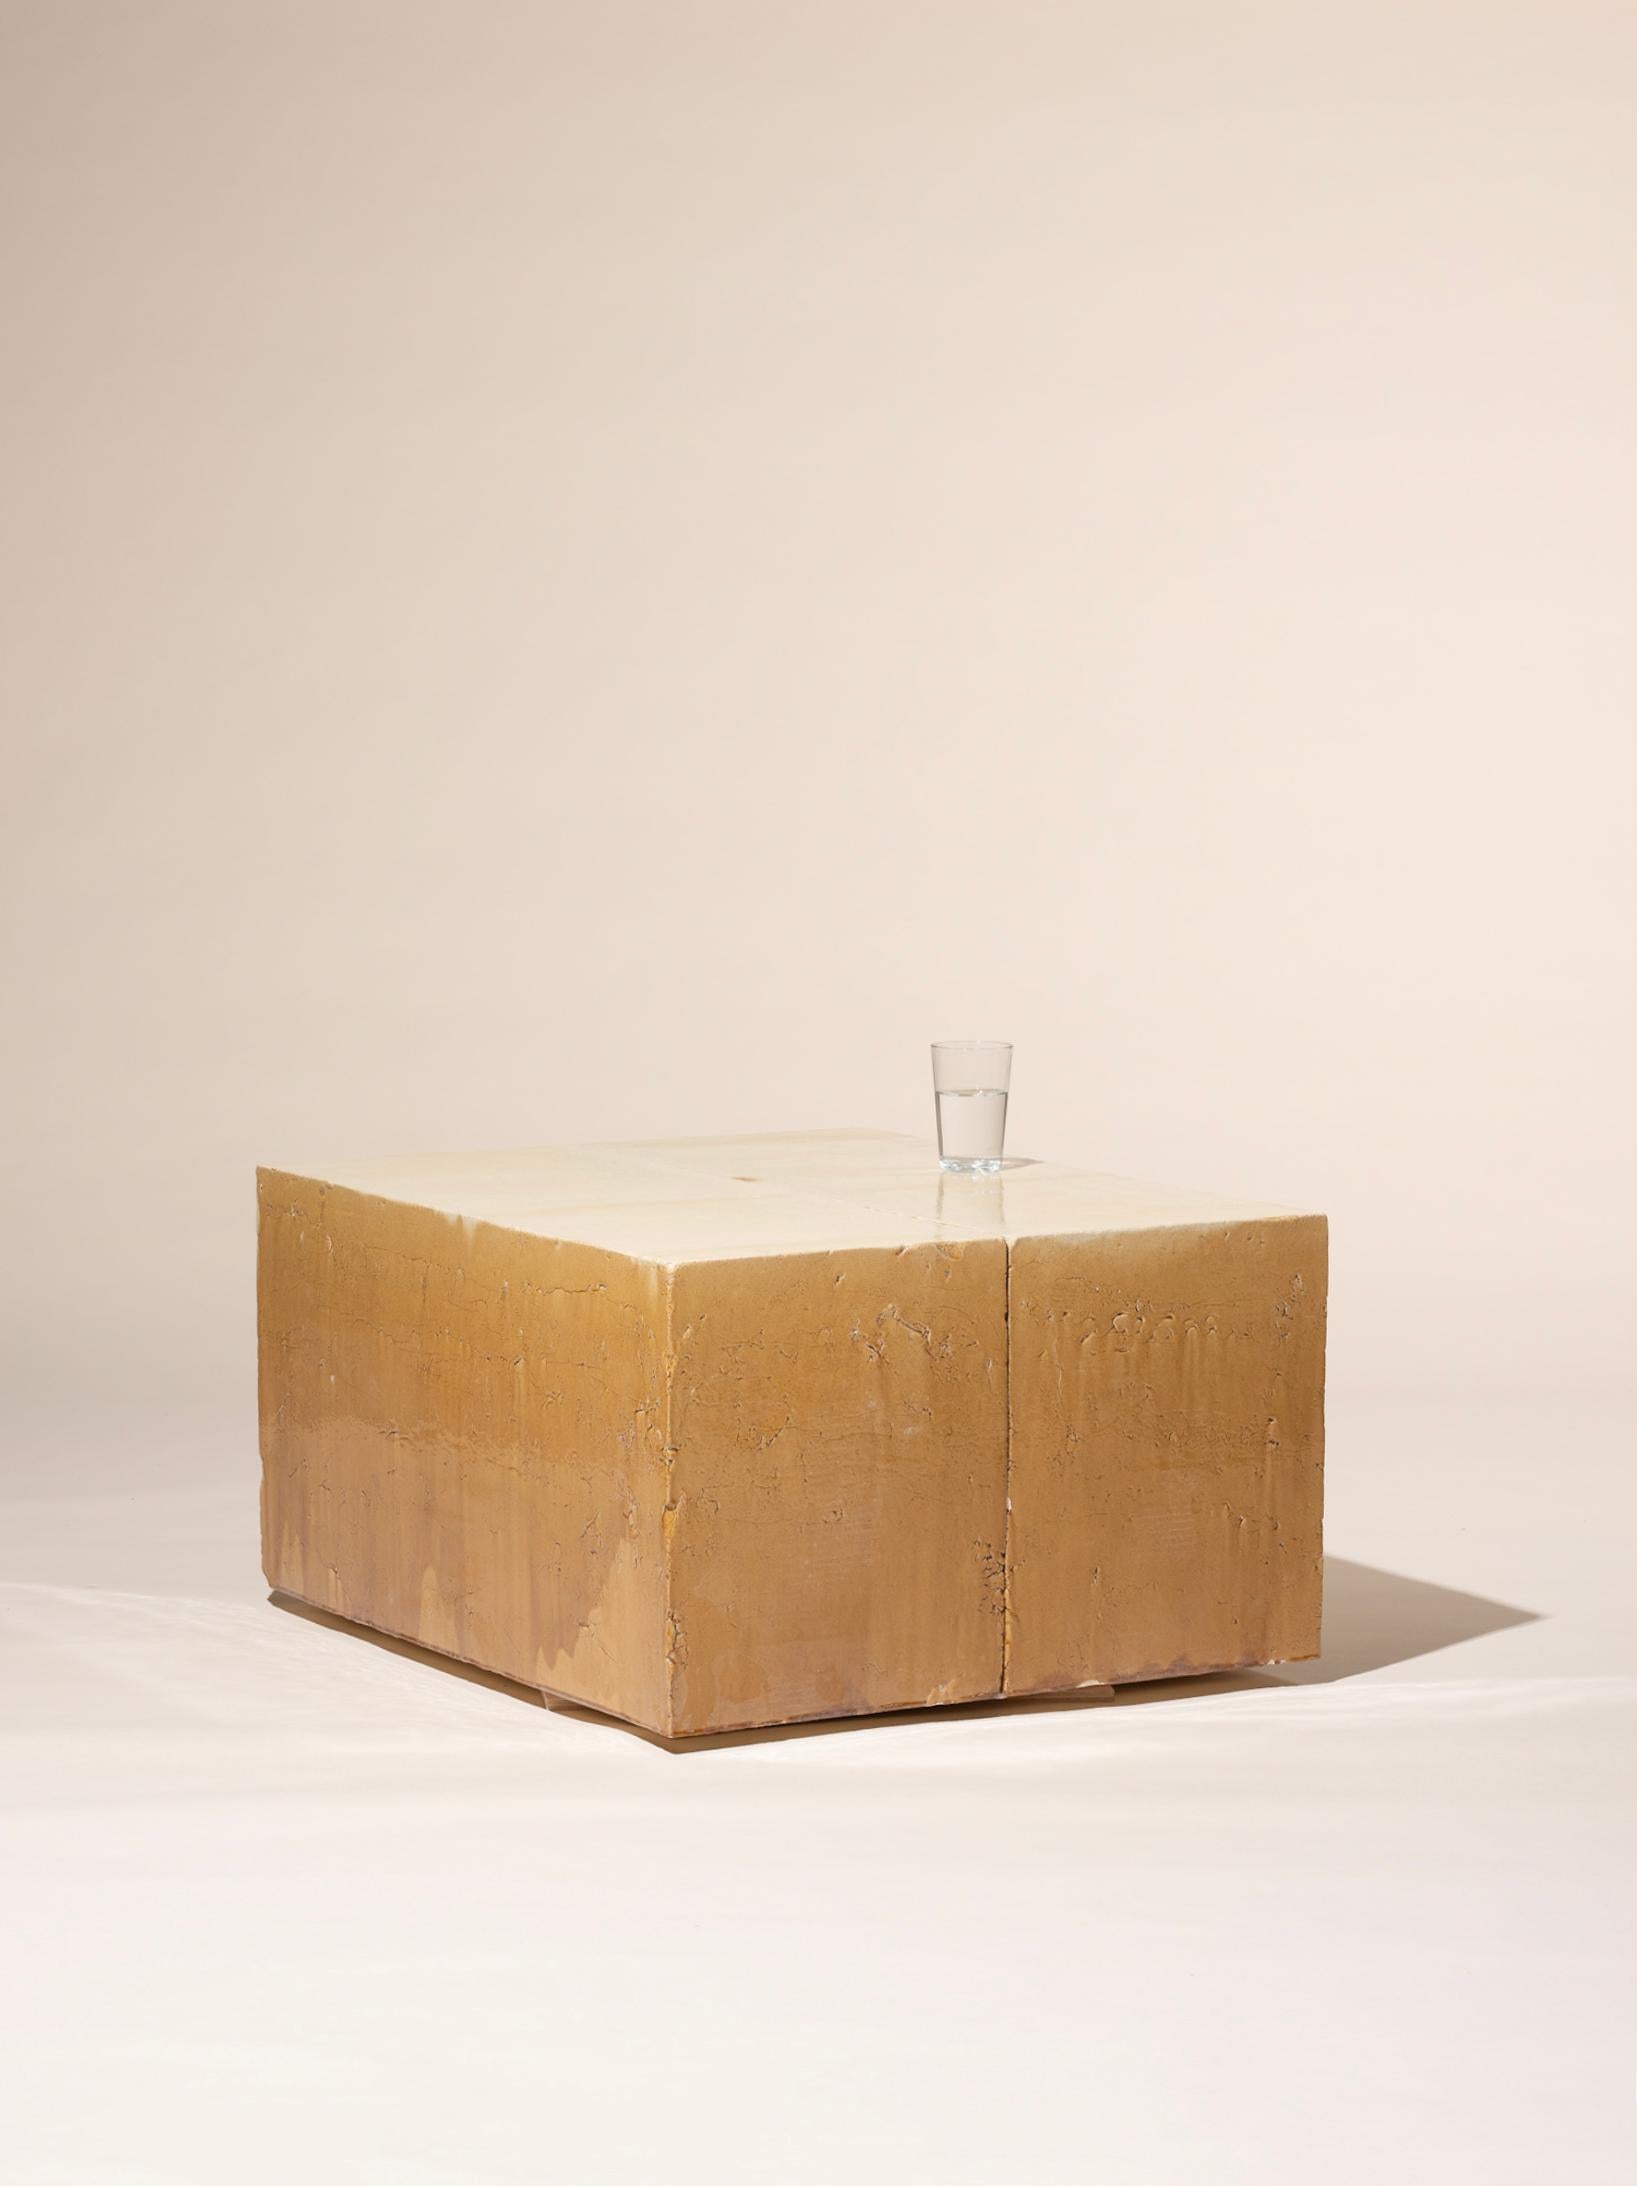 Contemporary Ceramic Modern Coffeetable / Sidetable Caramel Glazed Earthenware  In New Condition For Sale In Rubi, Catalunya